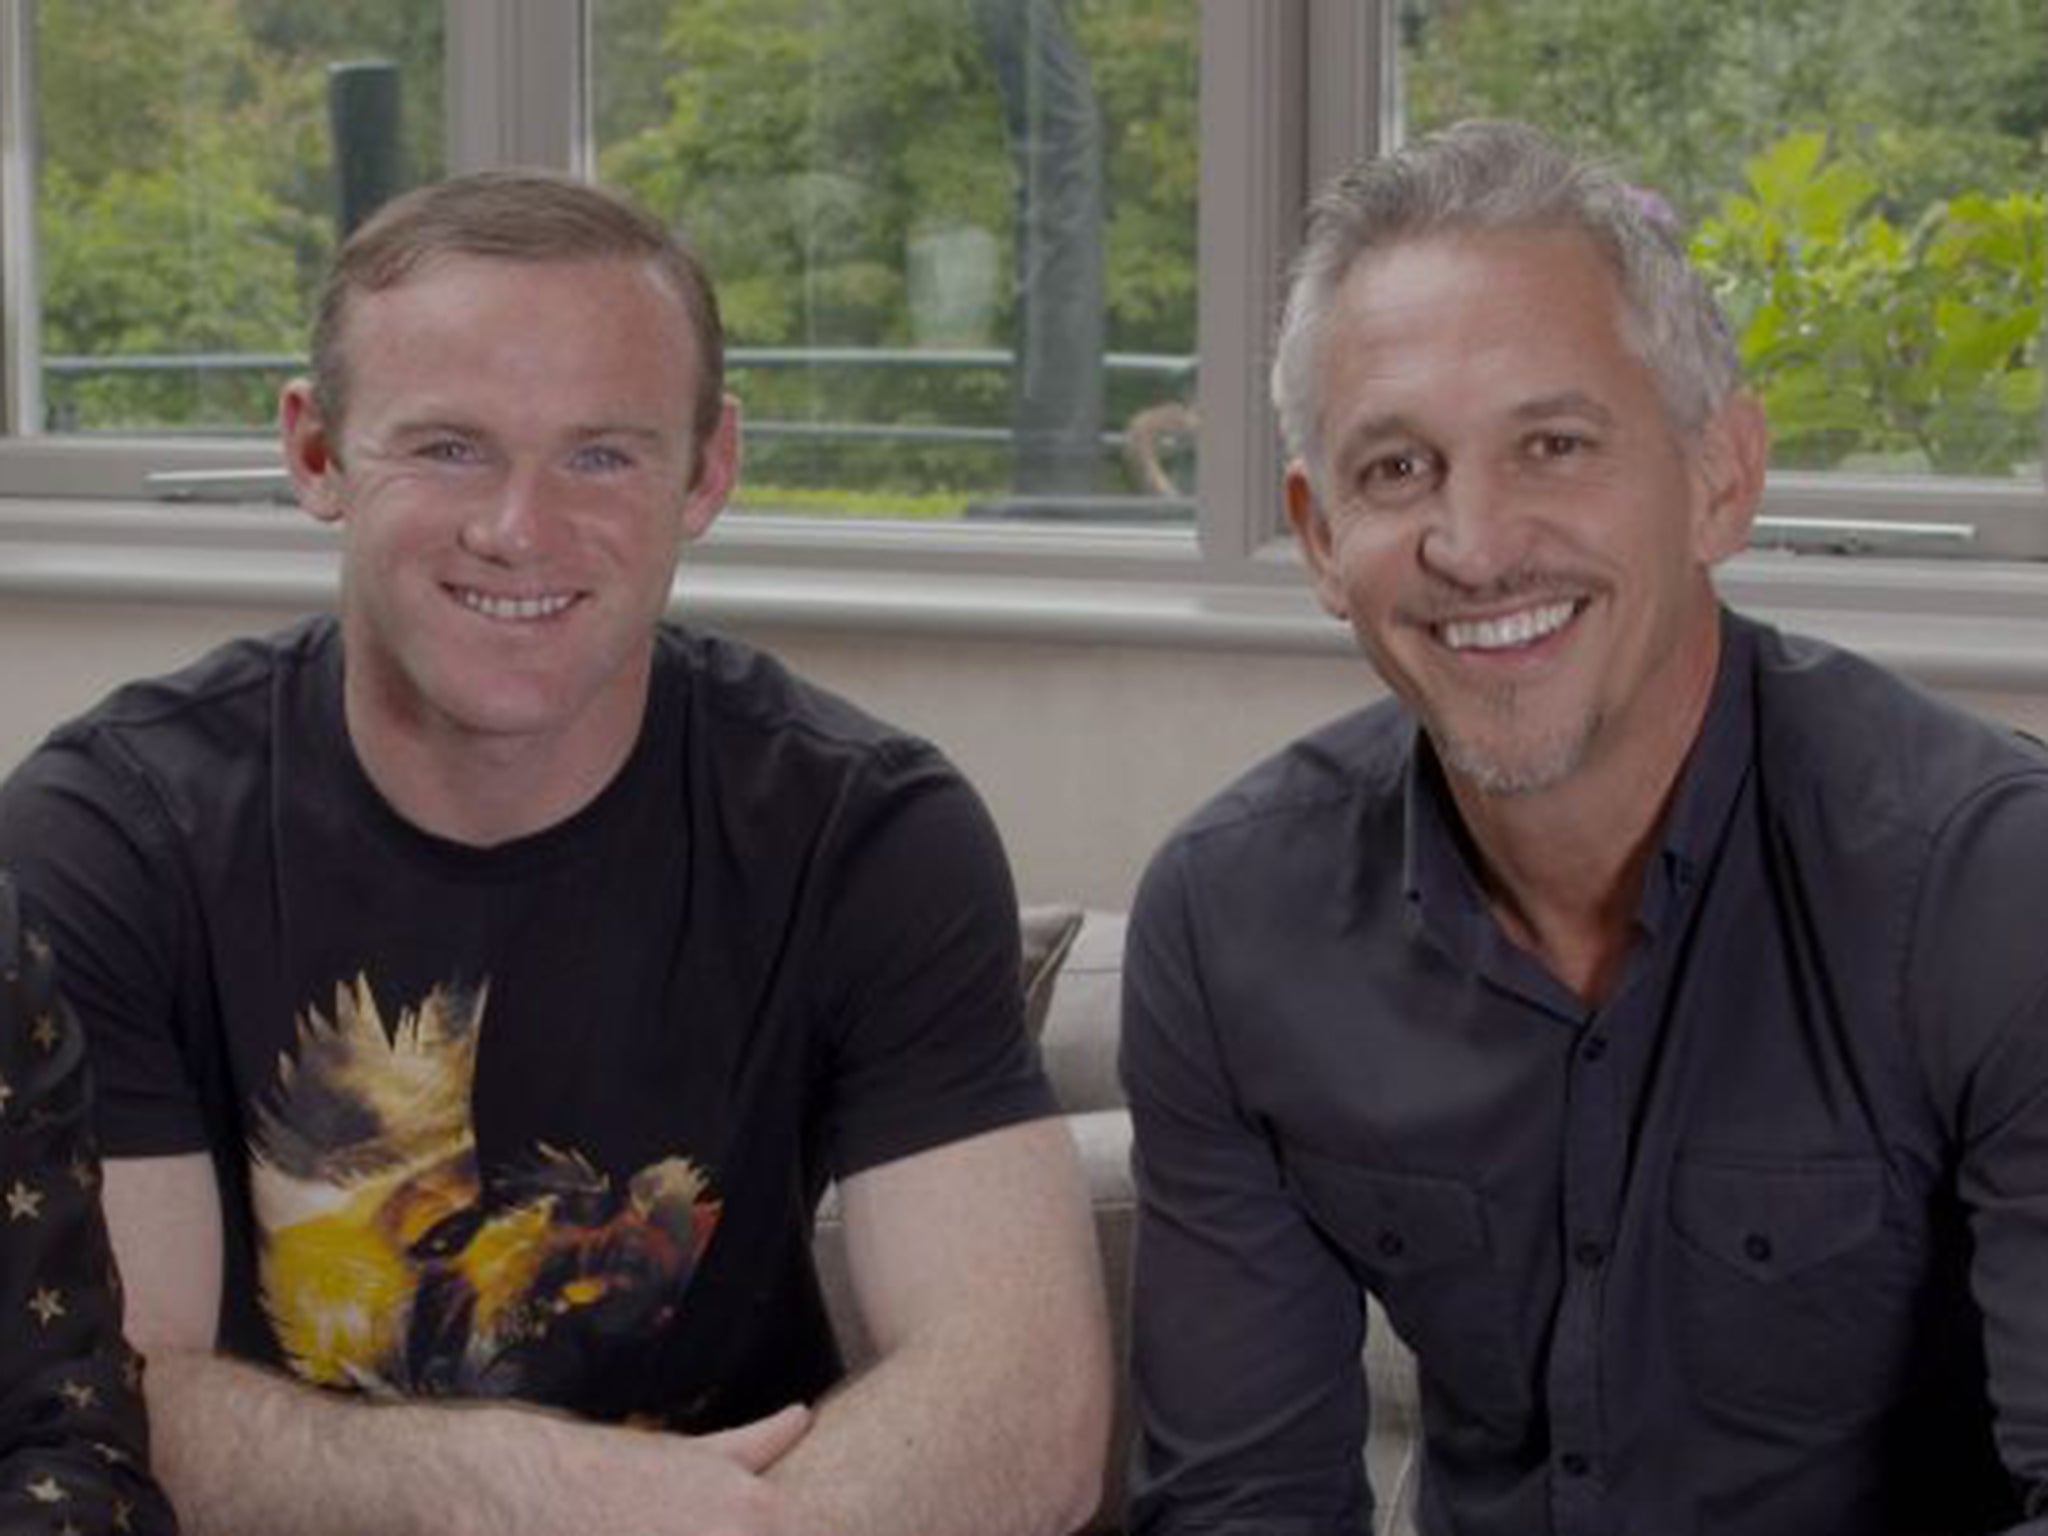 Wayne Rooney, left, and Gary Lineker, who presents the upcoming documentary